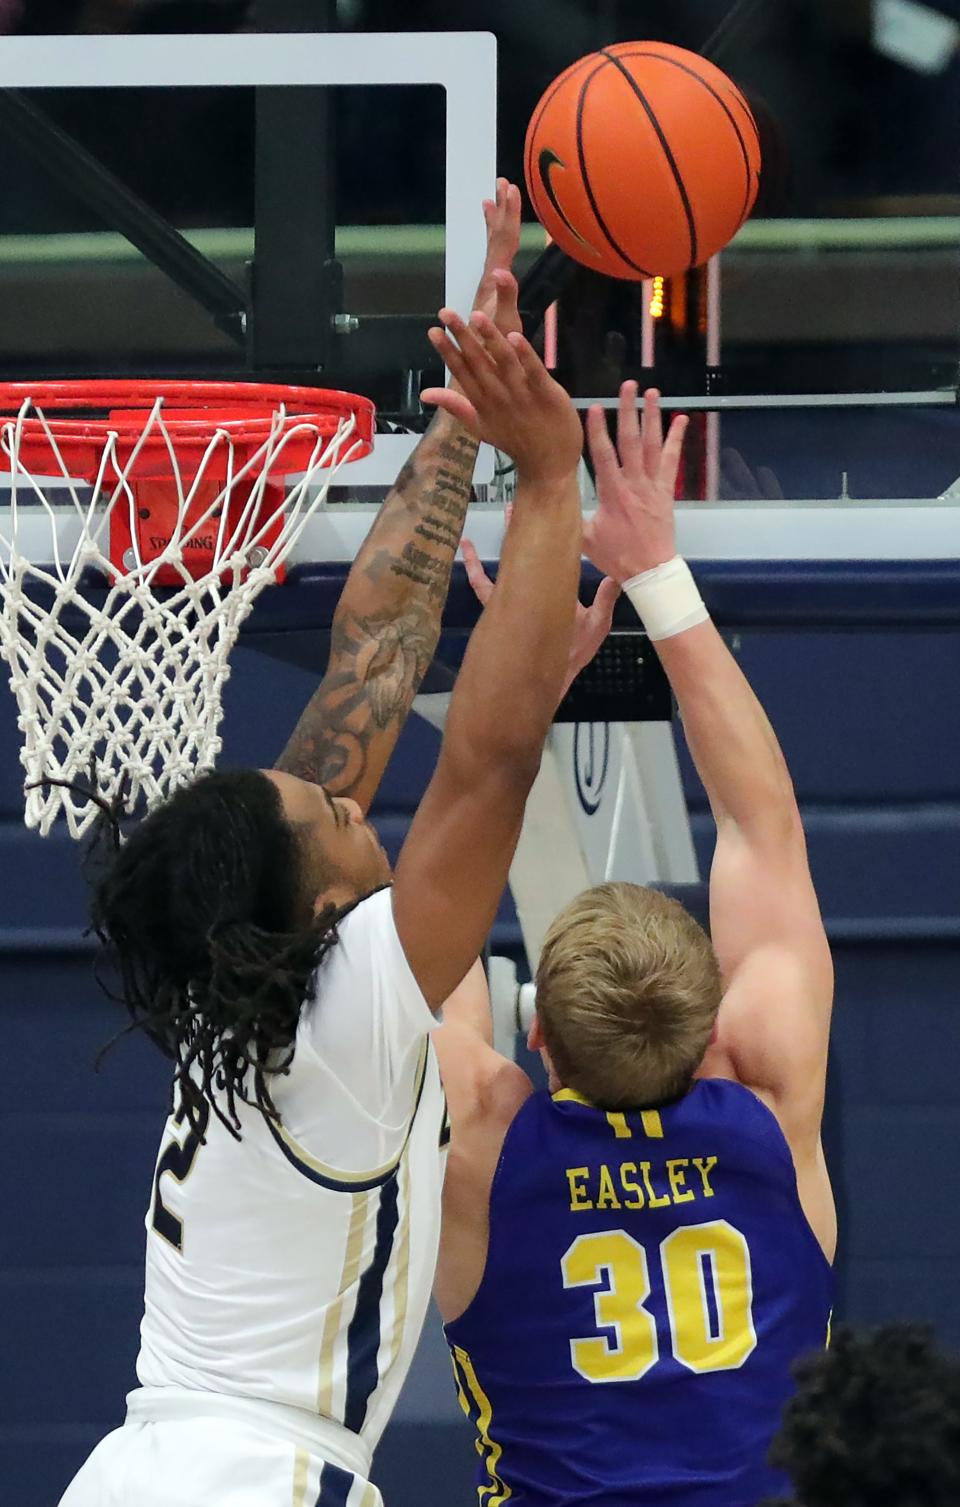 Akron Zips guard Greg Tribble blocks the shot ofSouth Dakota State guard Charlie Easley during the second half of an NCAA college basketball game, Monday, Nov. 7, 2022, in Akron, Ohio.